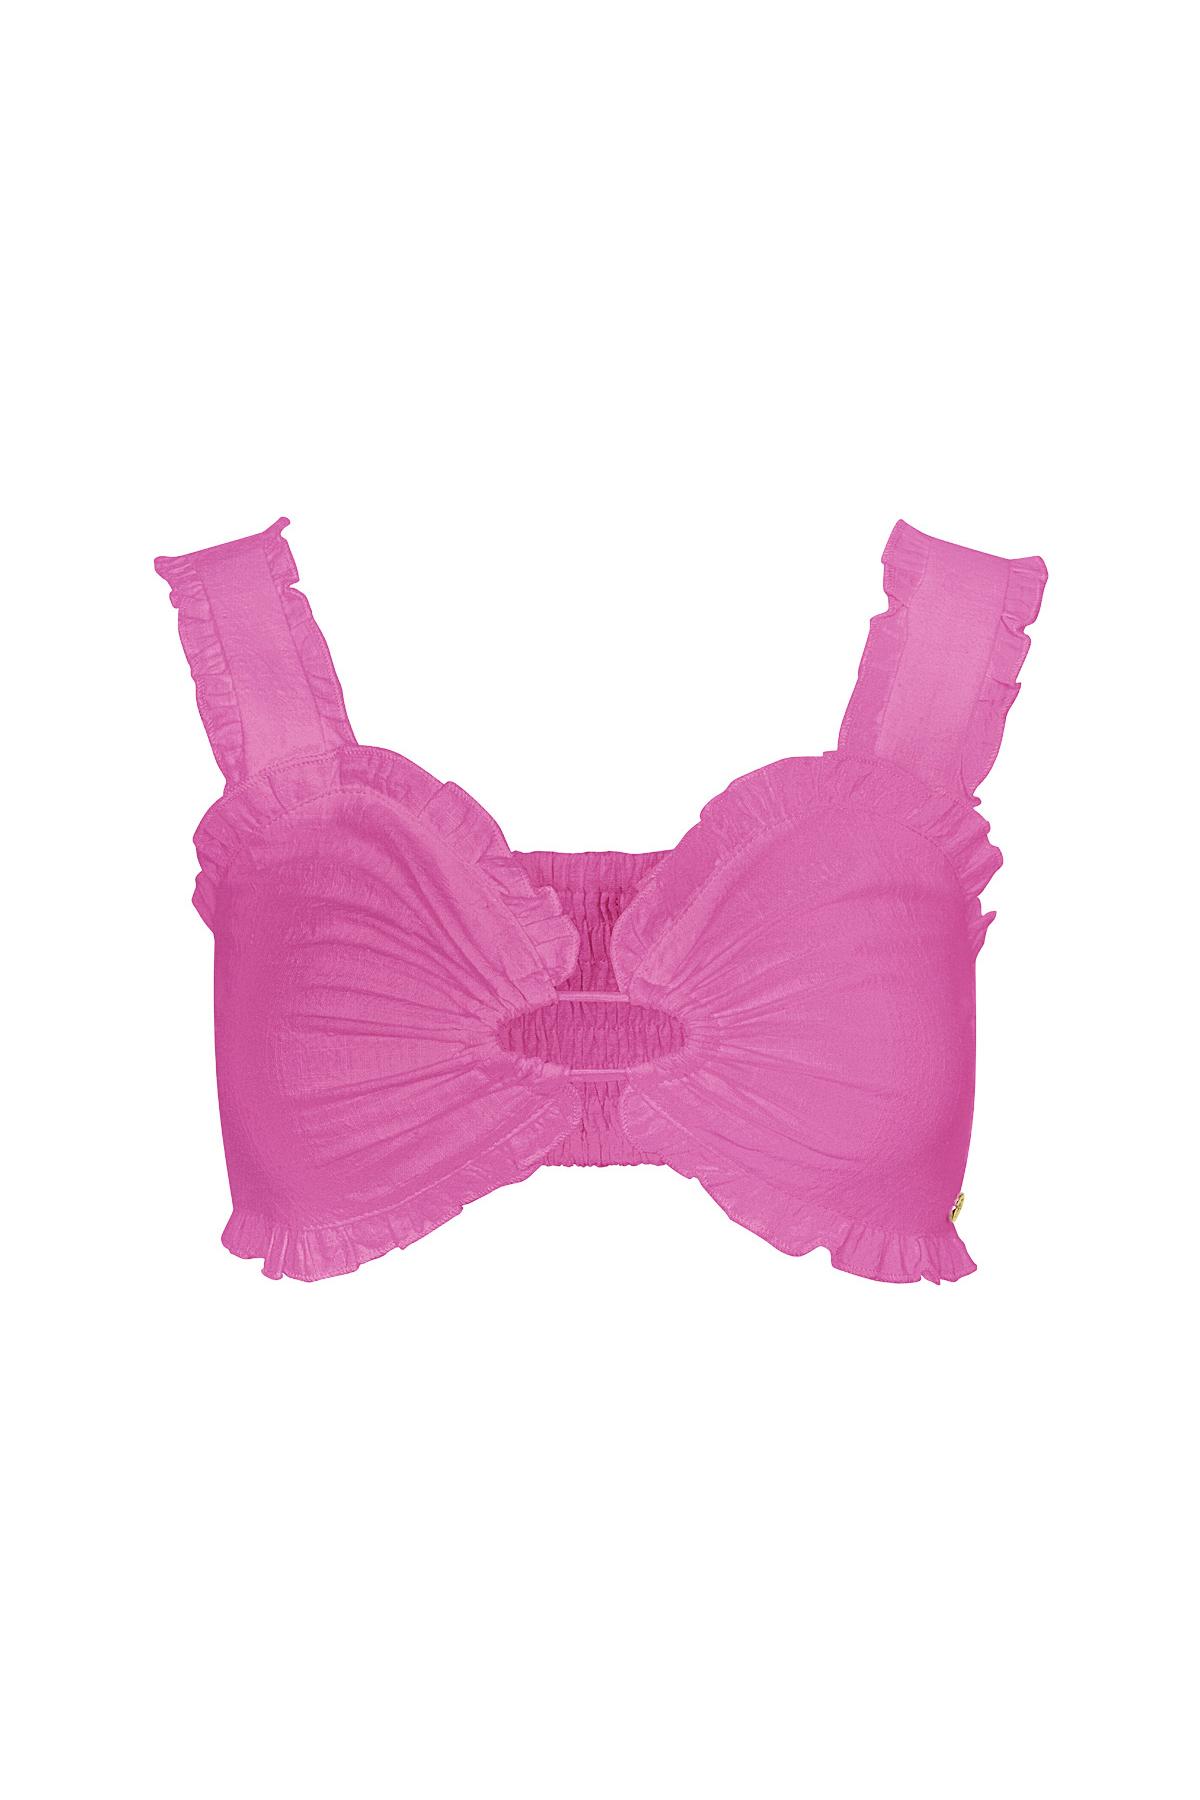 Crop top cut out - pink S